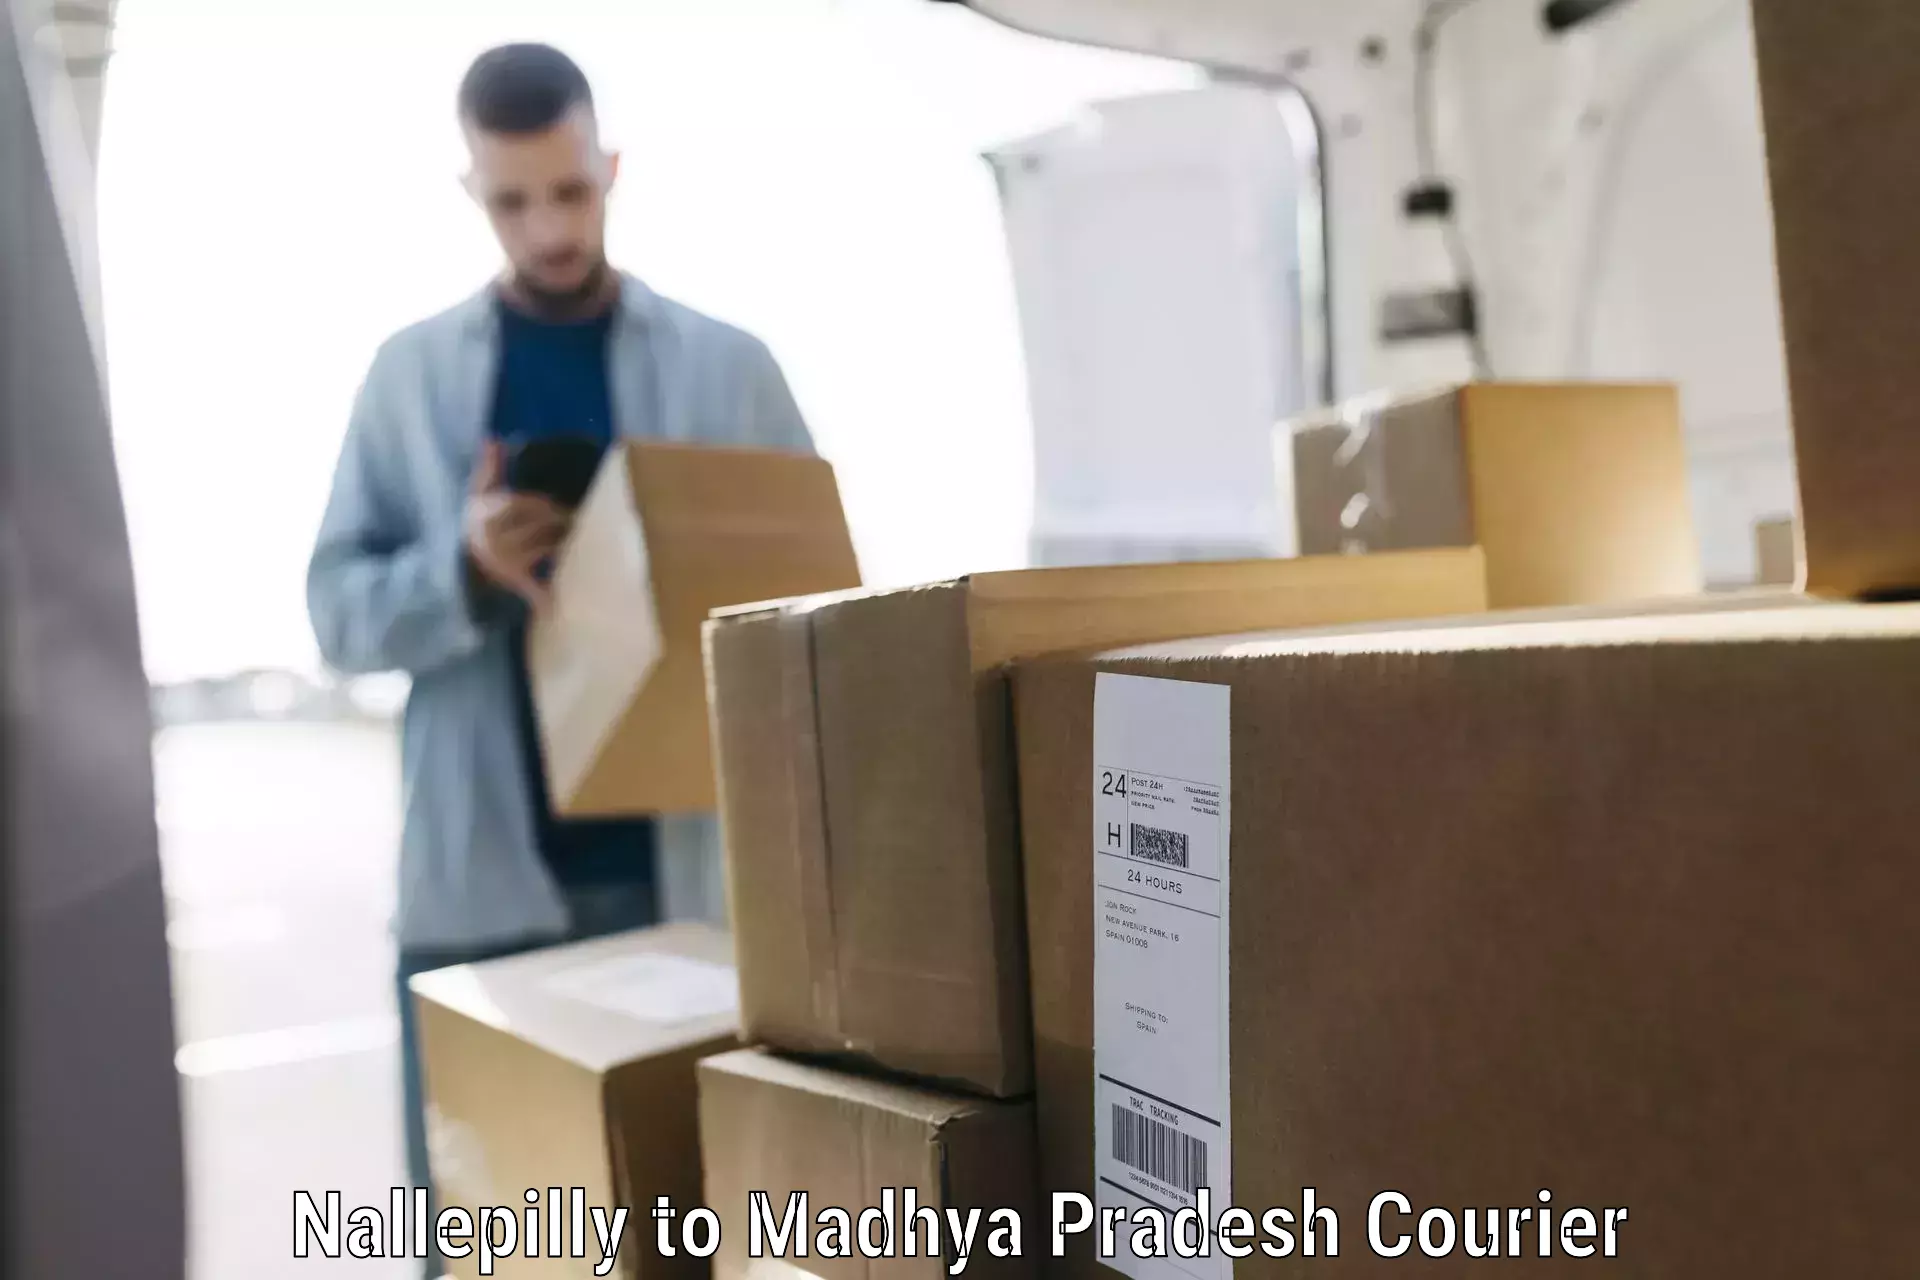 Efficient baggage courier system Nallepilly to Lavkush Nagar